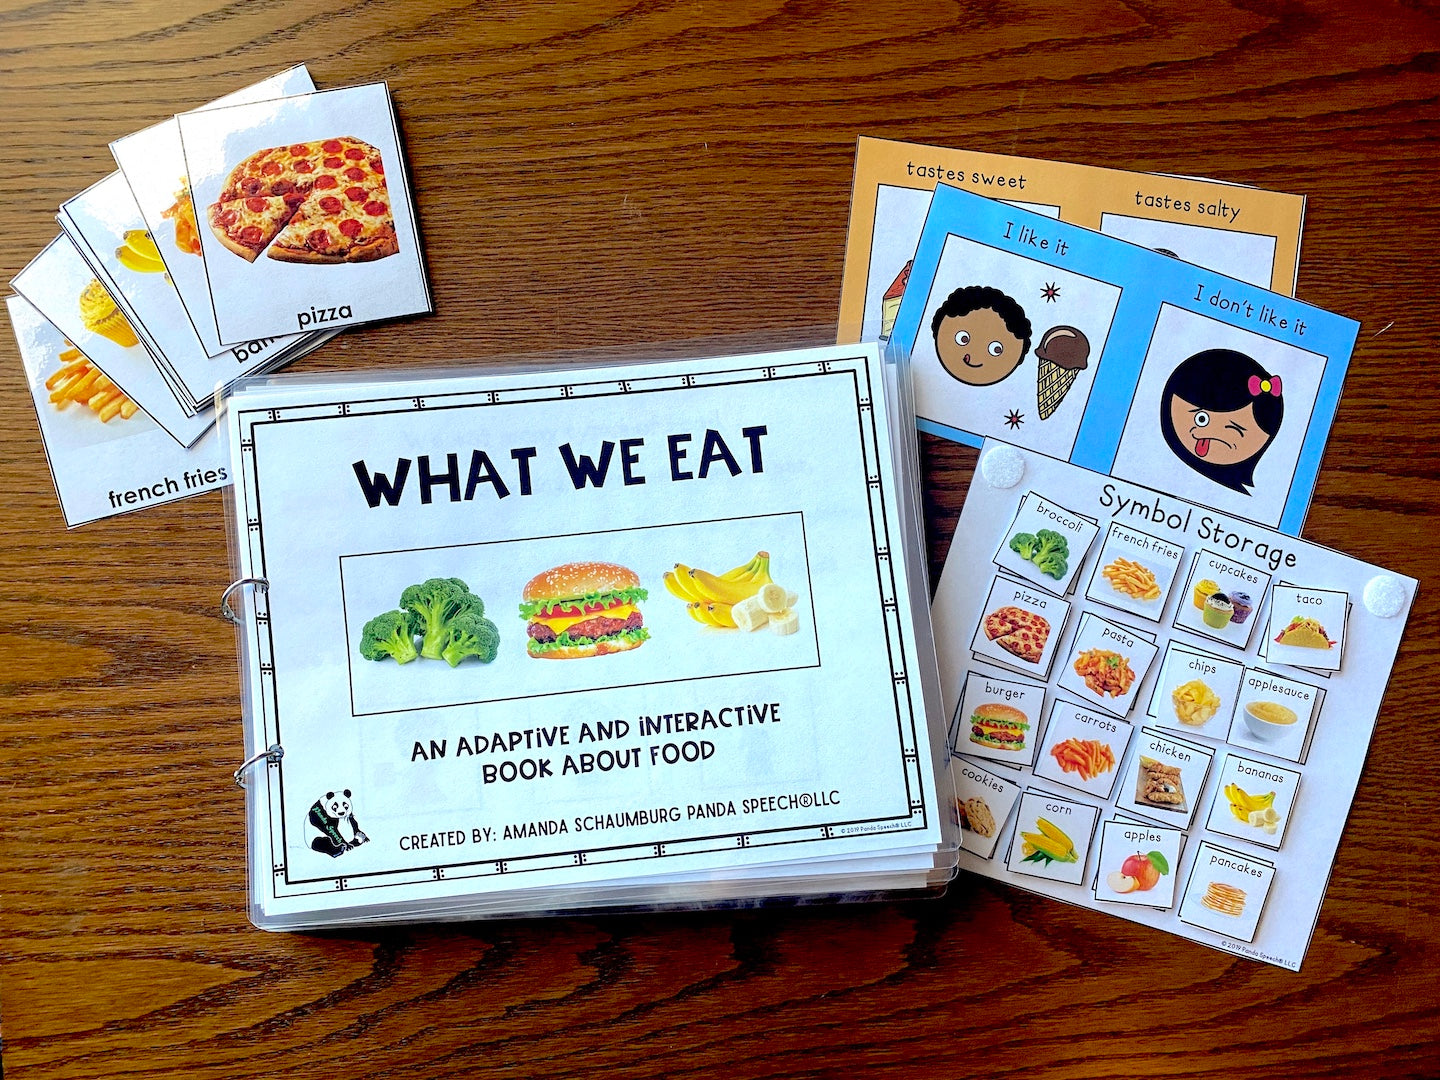 Real Photo Functional Vocabulary Book: What We Eat   Print & Make Book